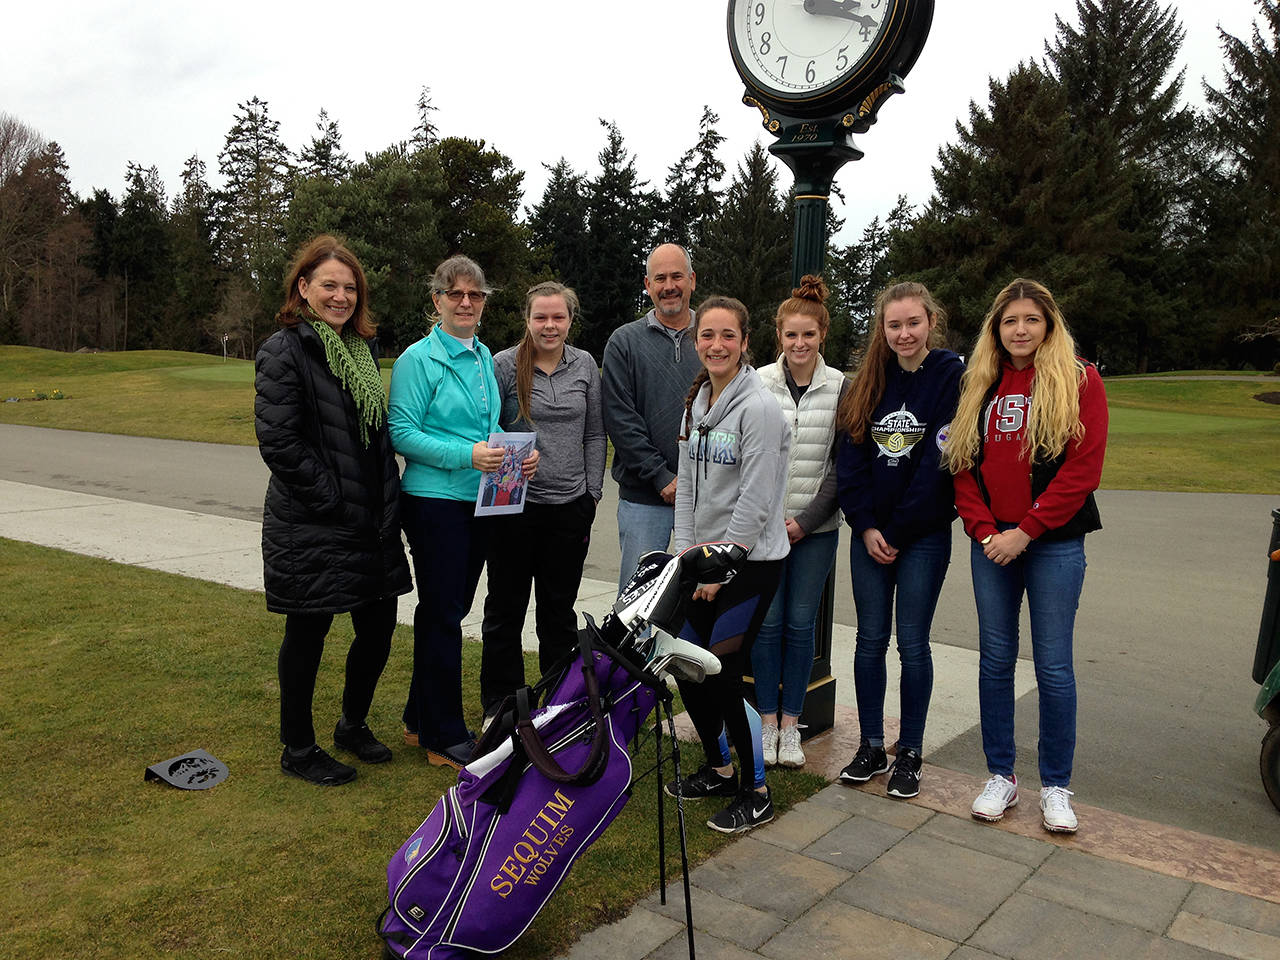 The Cedars at Dungeness Women’s Golf Club donated proceeds from its annual Whine & Roses Golf Tournament to the Sequim High School Golf program. Women’s Club Co-Captain Judy Reno, far left, is joined by Captain Lisa Ballanytne in presenting the donation to Sequim girls golfer Sarah Shea, head coach Gary Kettel and team members Christiana Hoesel, Samantha Smith, Brittney Gale and Angela Carillo-Burge.